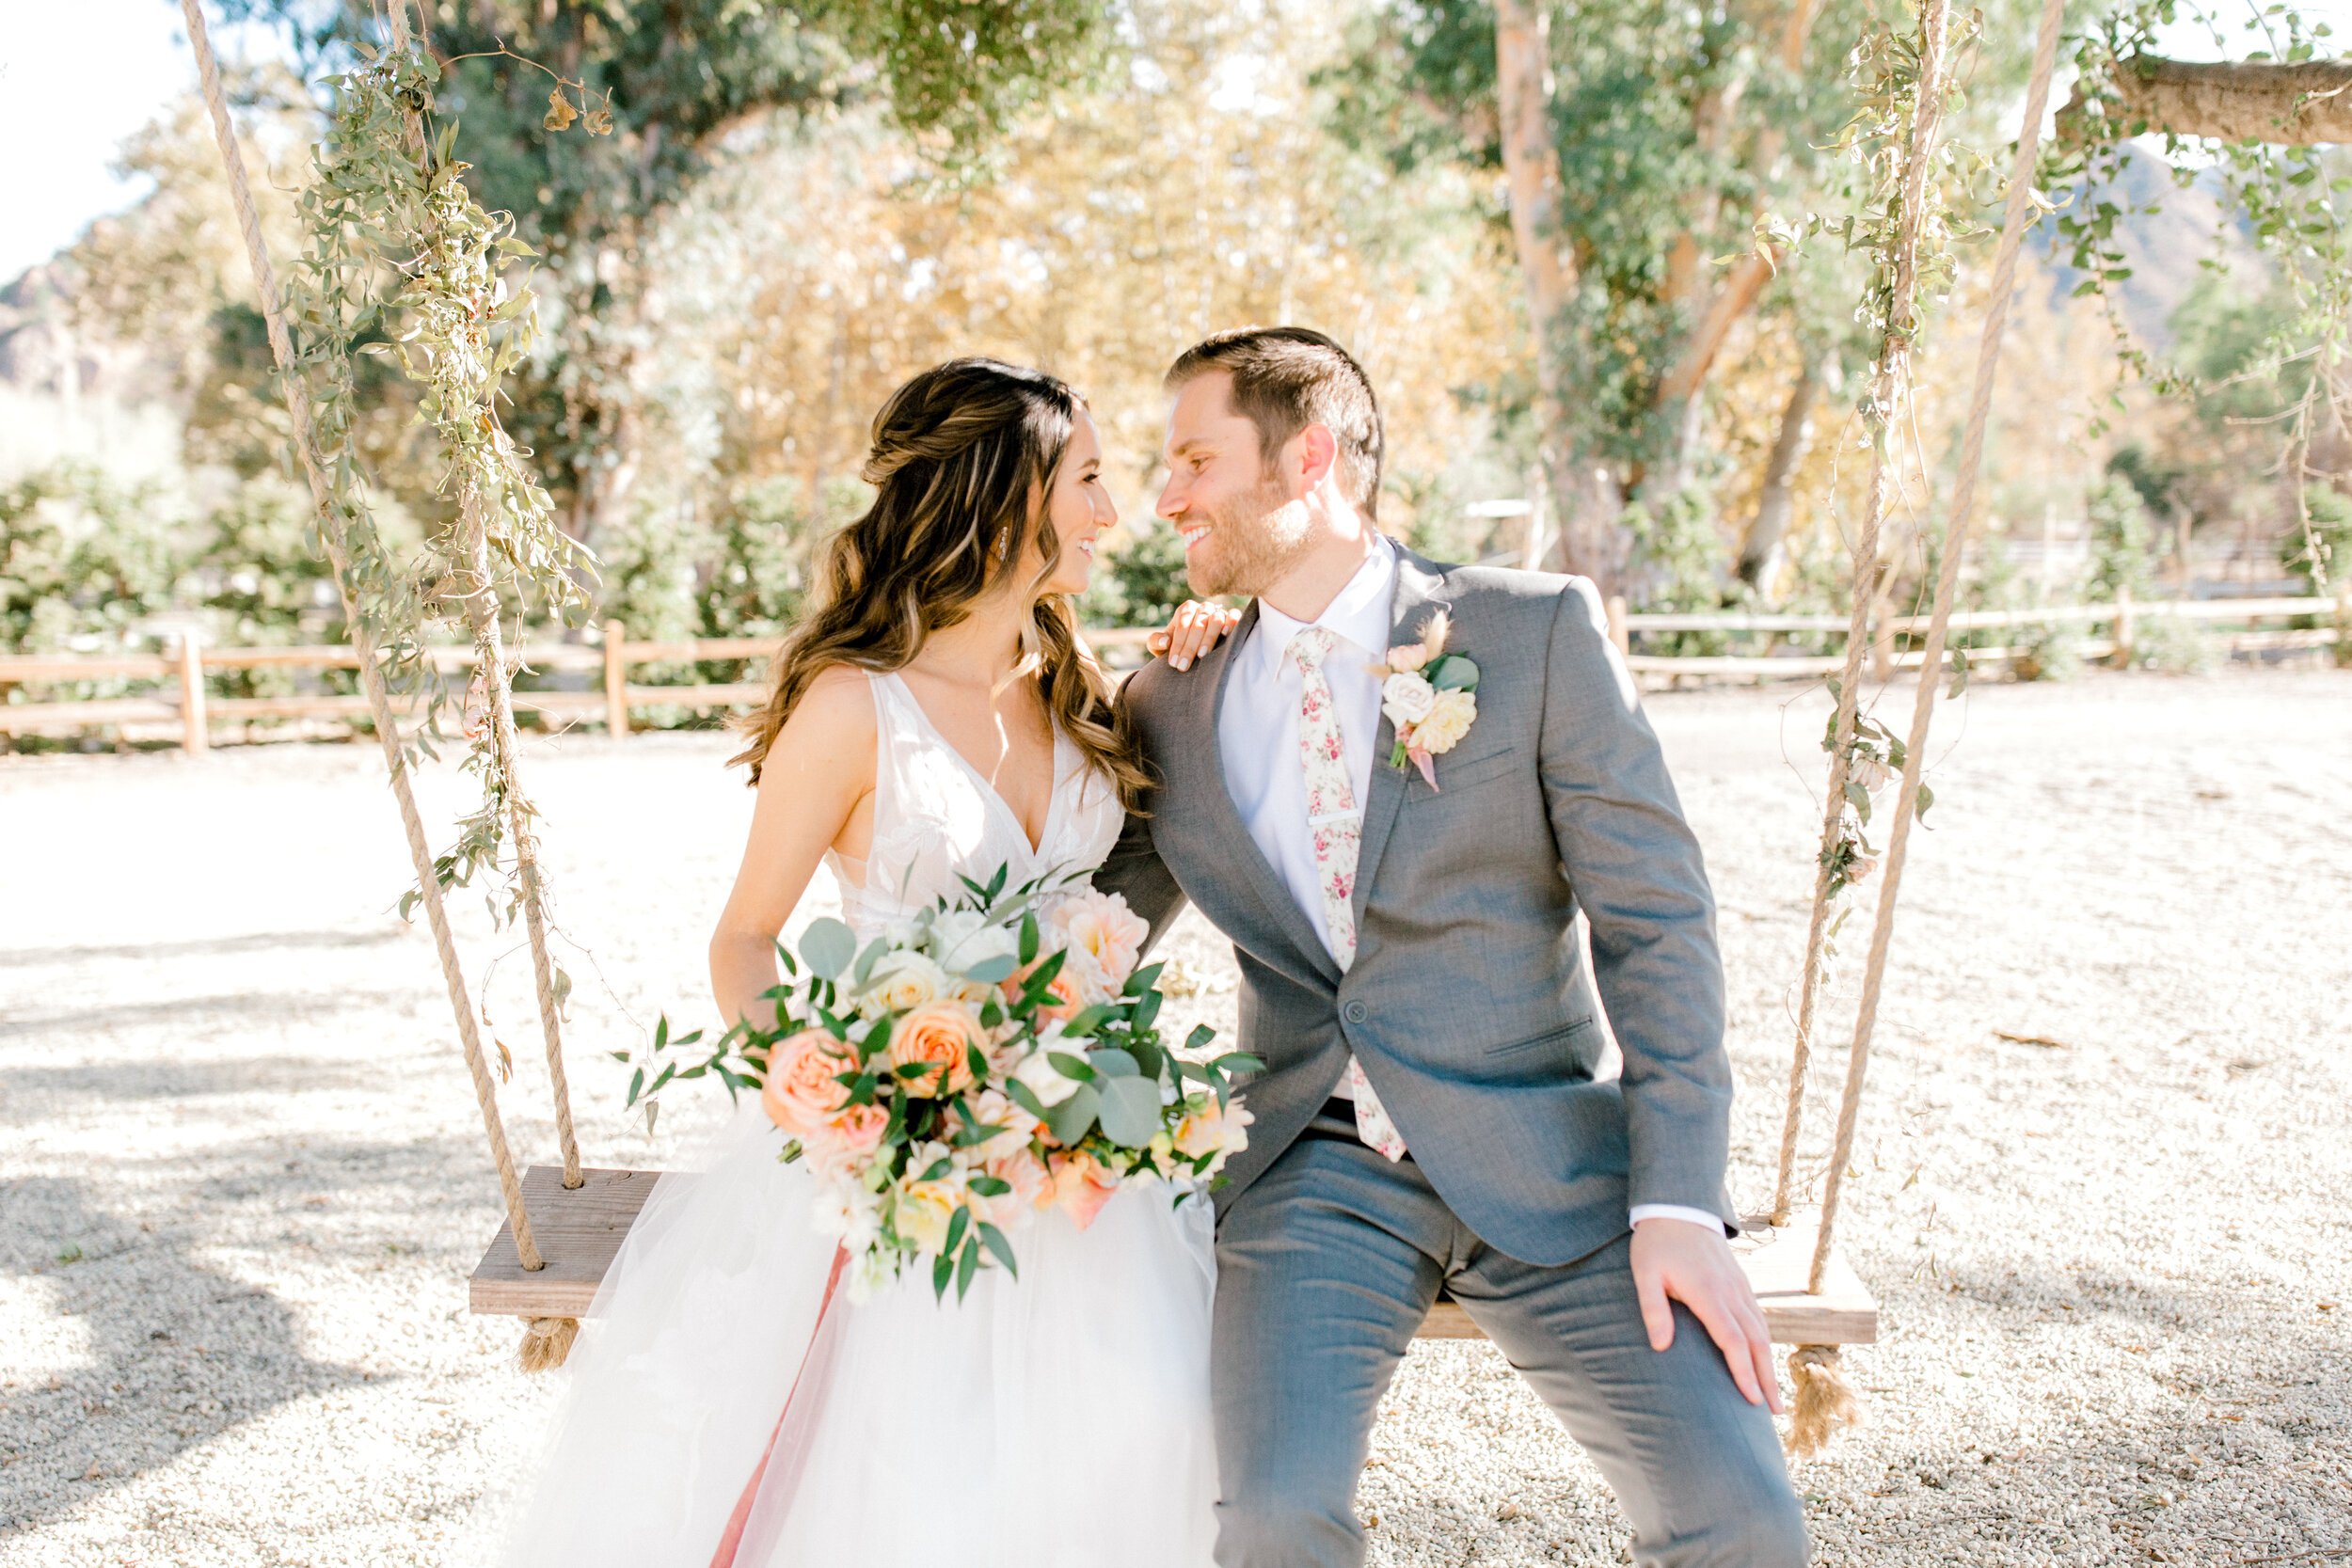 www.santabarbarawedding.com | Events by Fran | Brooke Borough Photography | Triunfo Creek Vineyards | Velvet Blooms | Lili Bridals | Blushing Beauty | Bride and Groom on Swing